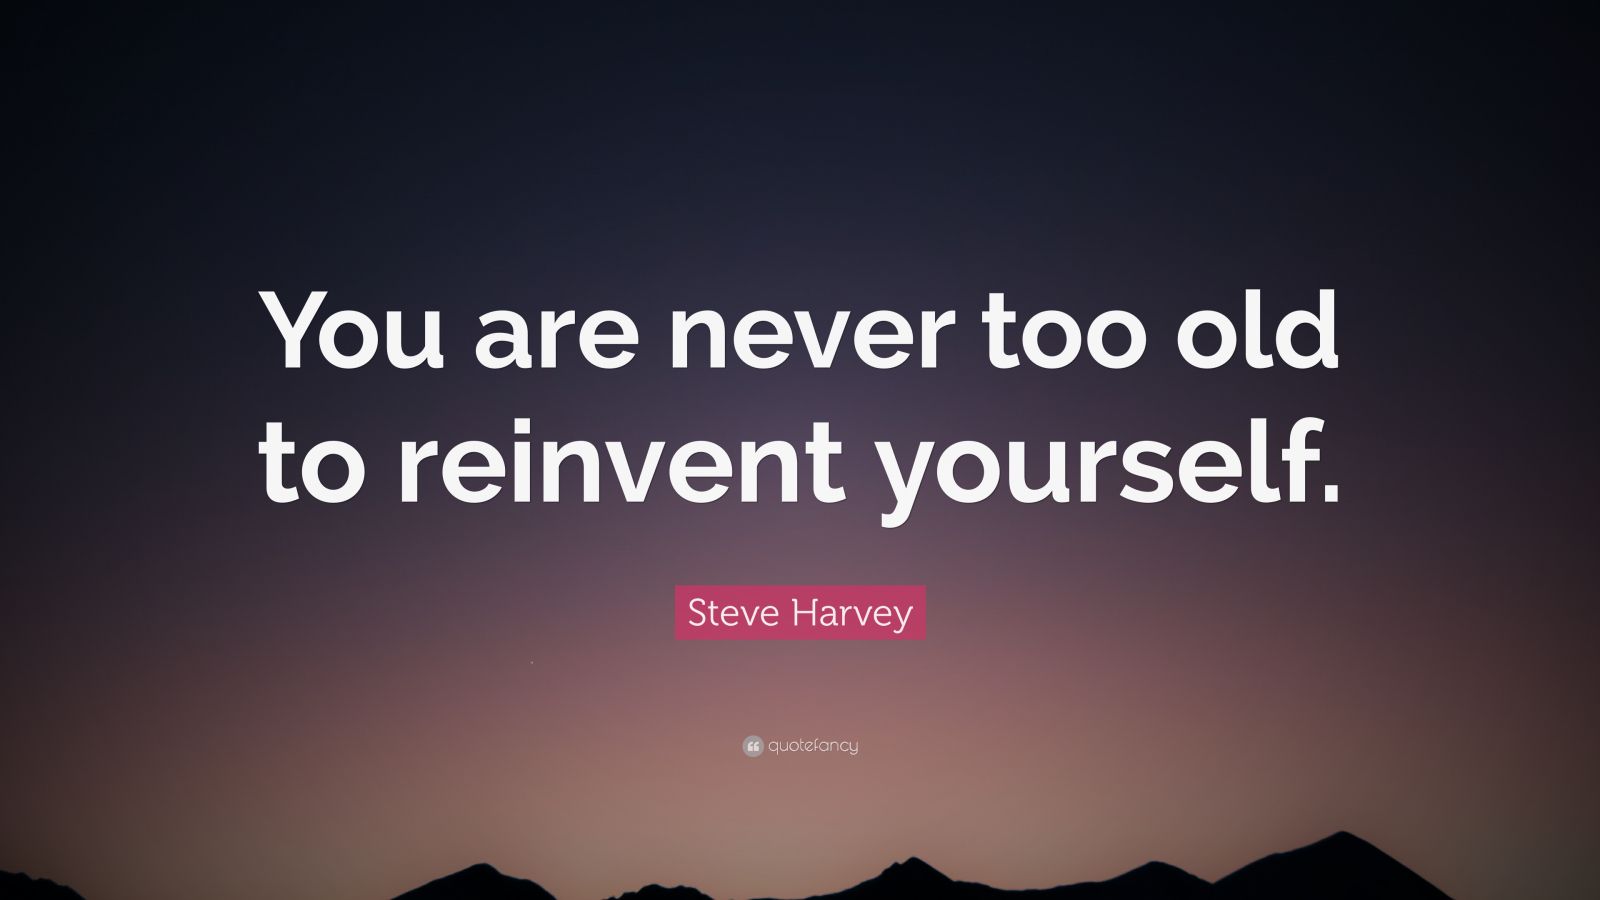 Steve Harvey Quote: “You are never too old to reinvent yourself.” (12 ...